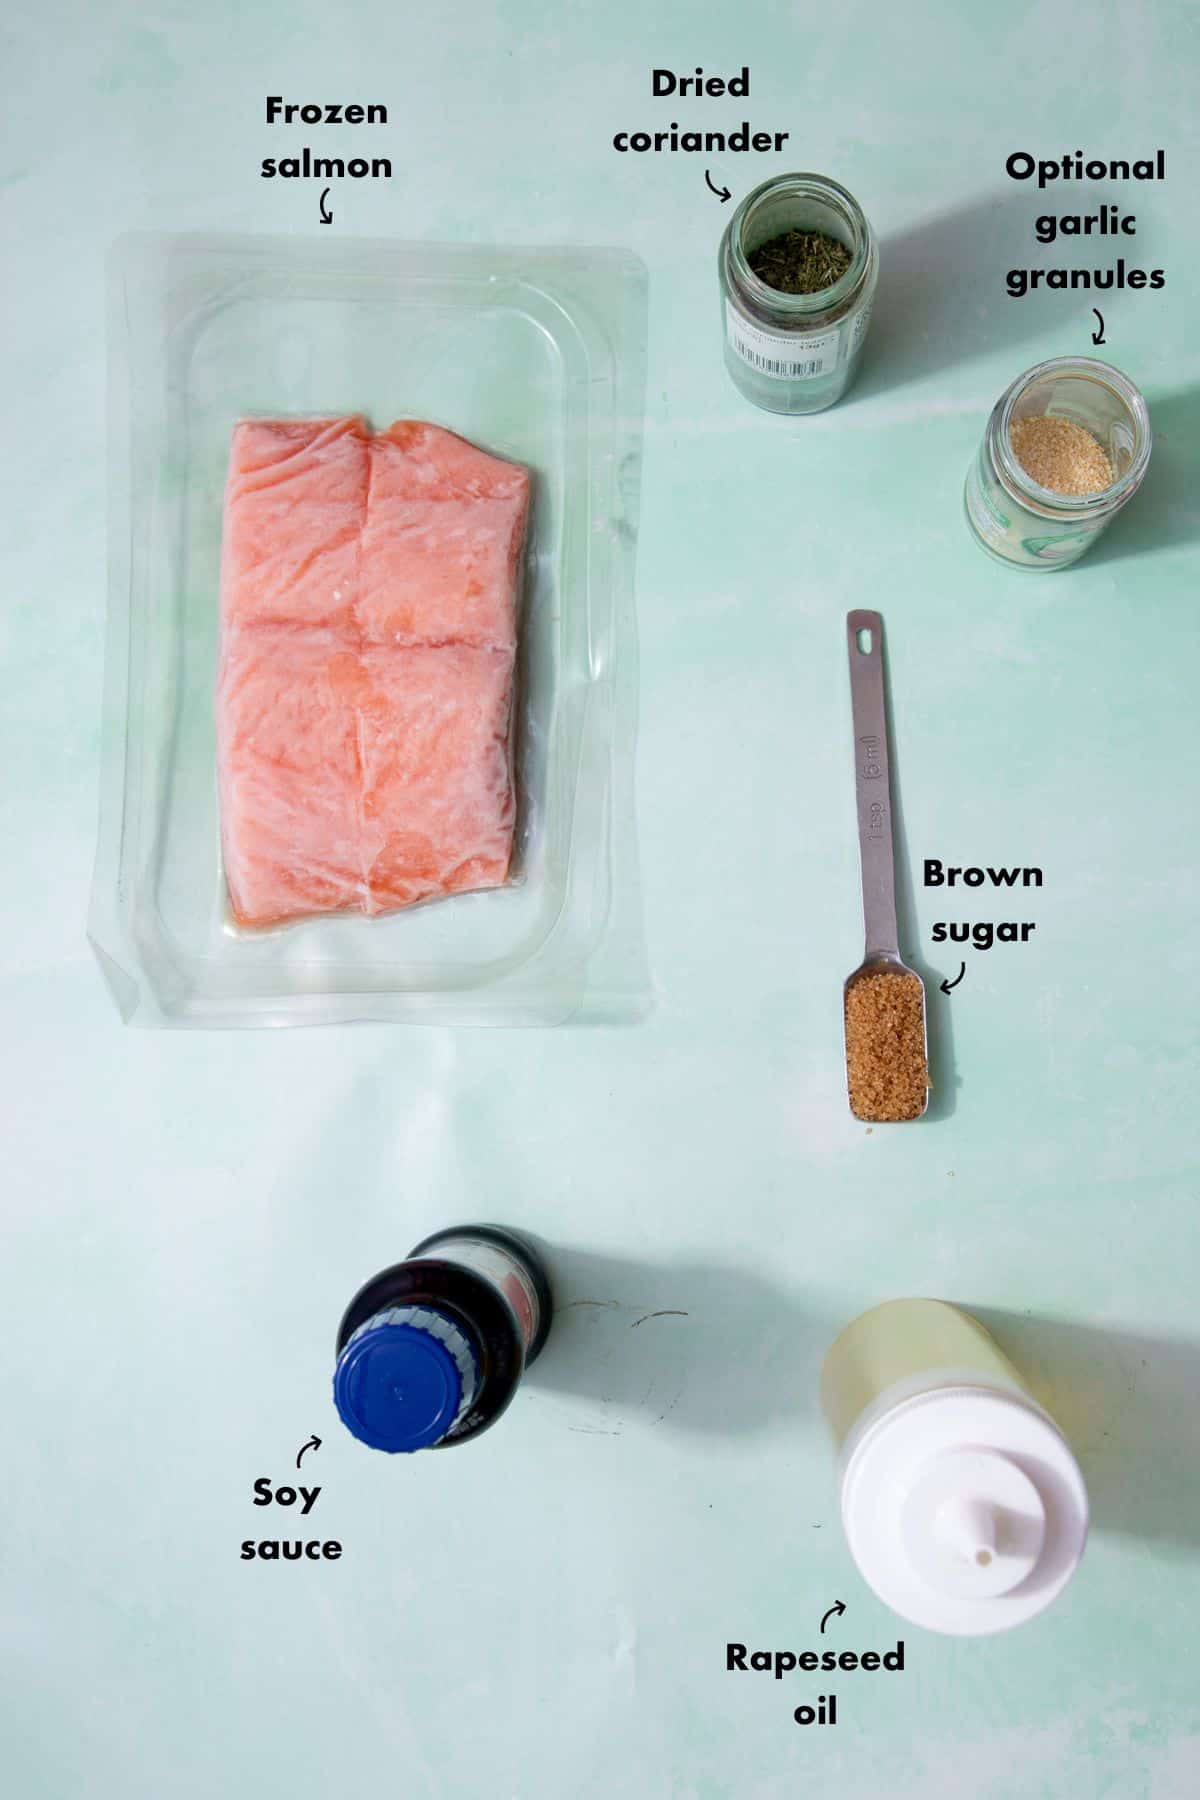 Ingredients to make the frozen salmon recipe laid out on a pale blue background and labelled.